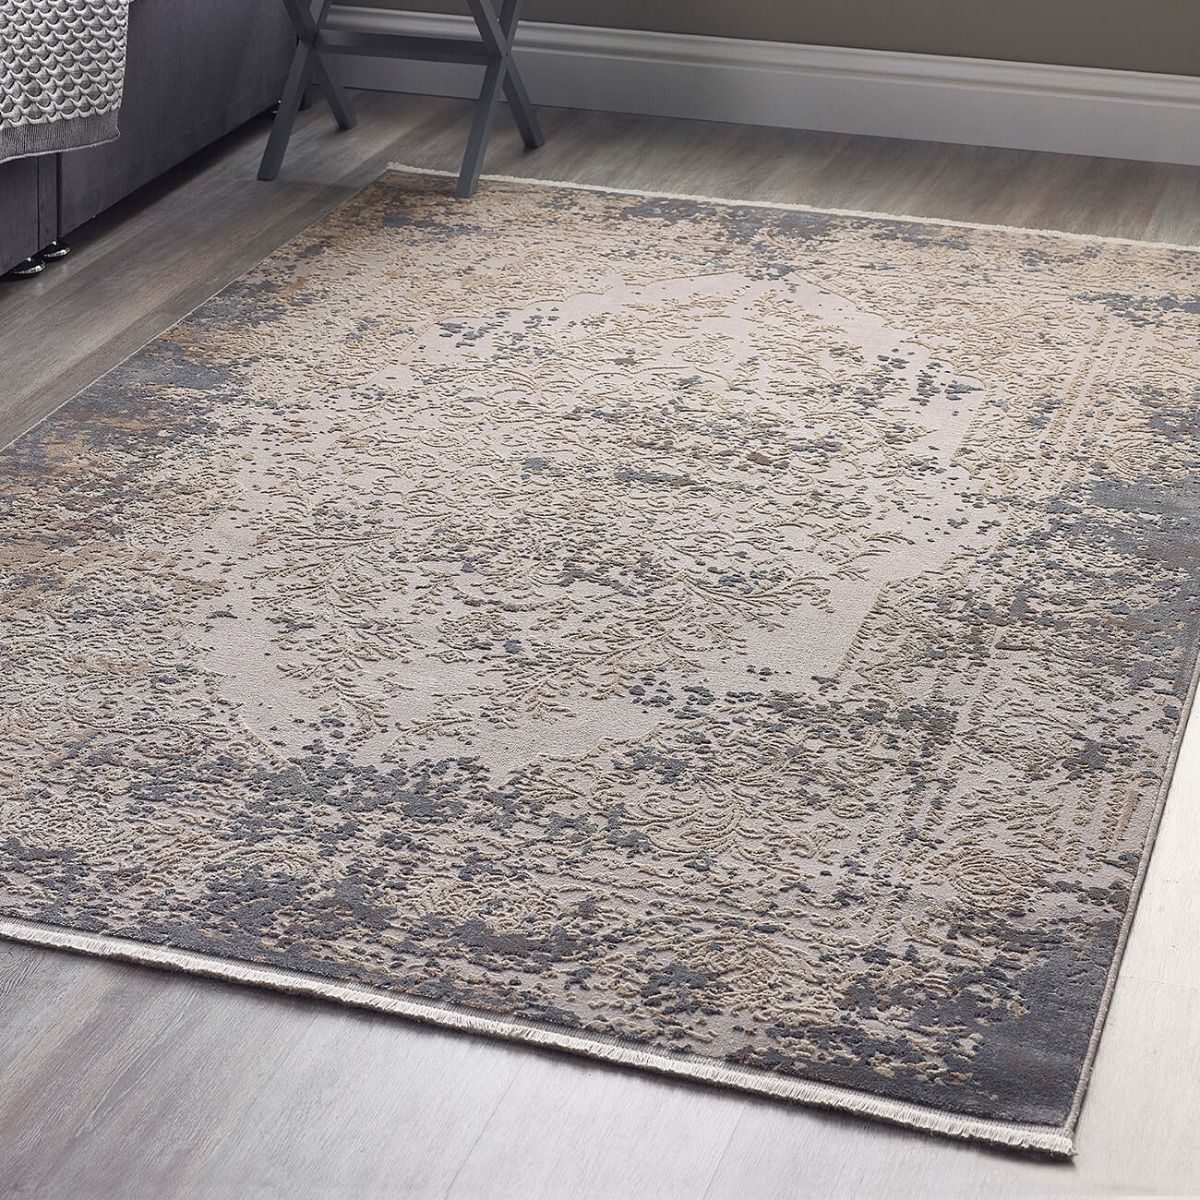 A2Z Rug Classic Vintage Style Area Rugs Sparkle Finish Shadow Medallion Carpets 